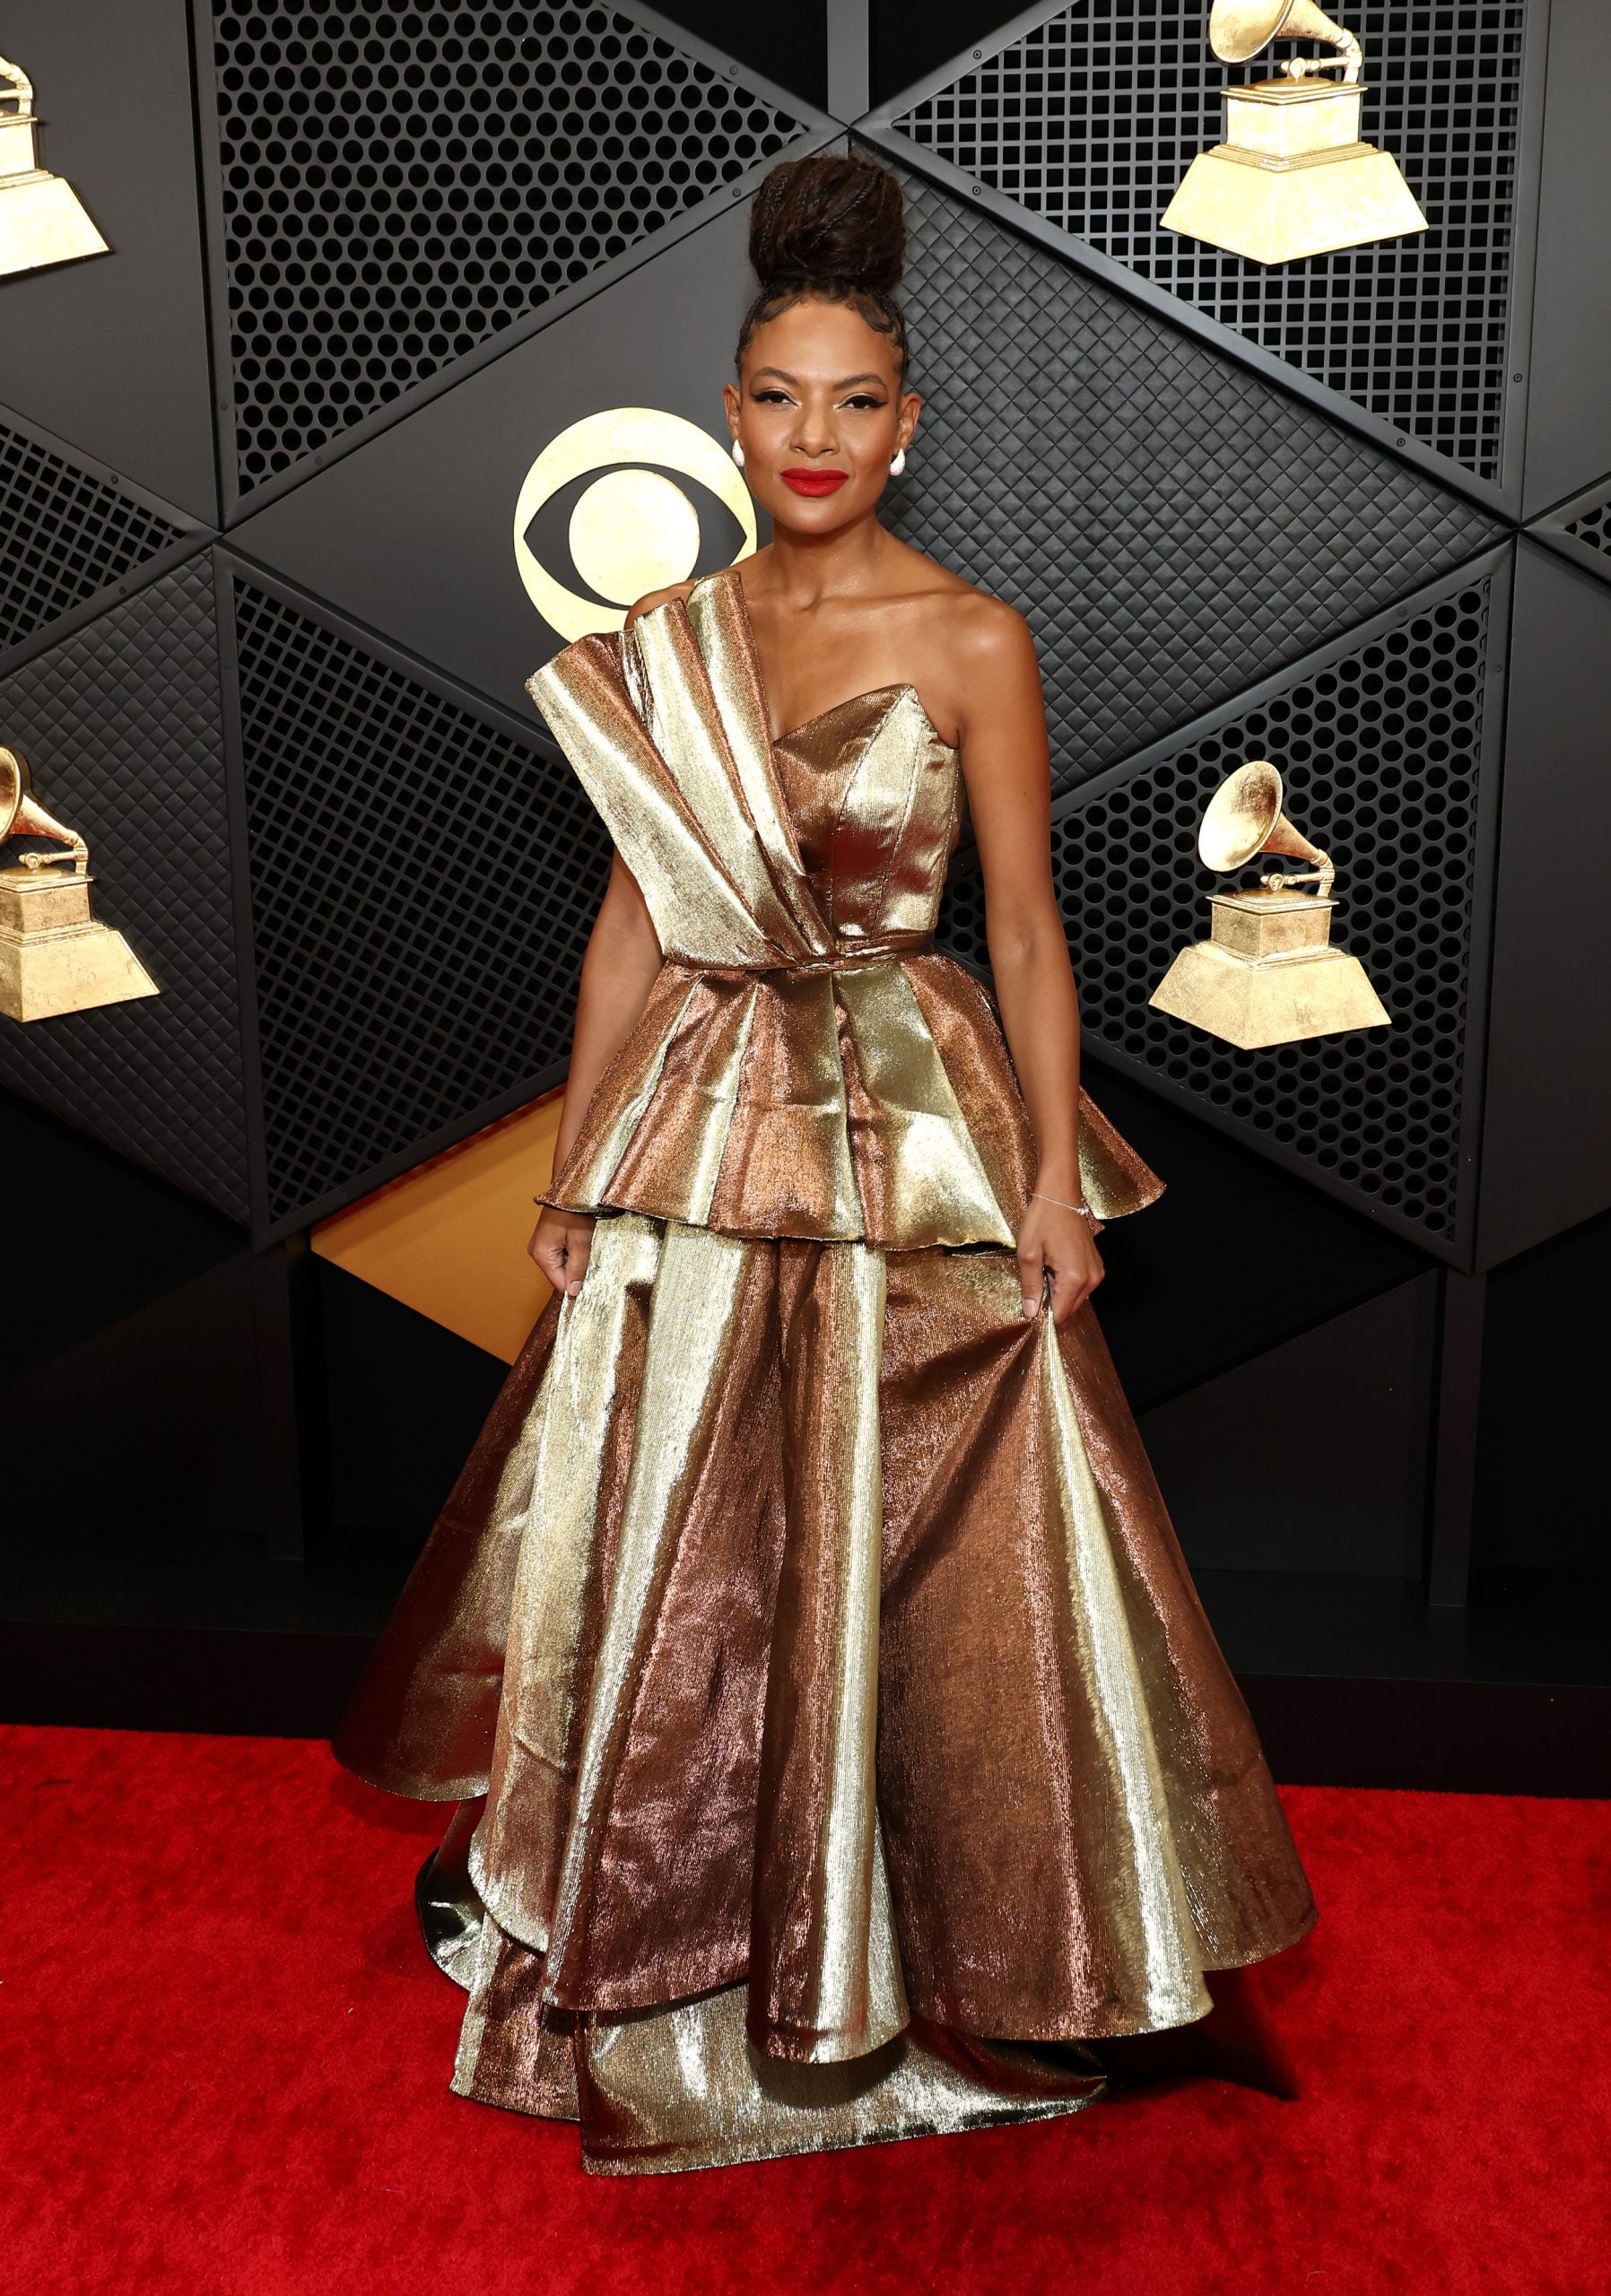 The Best Looks At The 66th Annual Grammy Awards